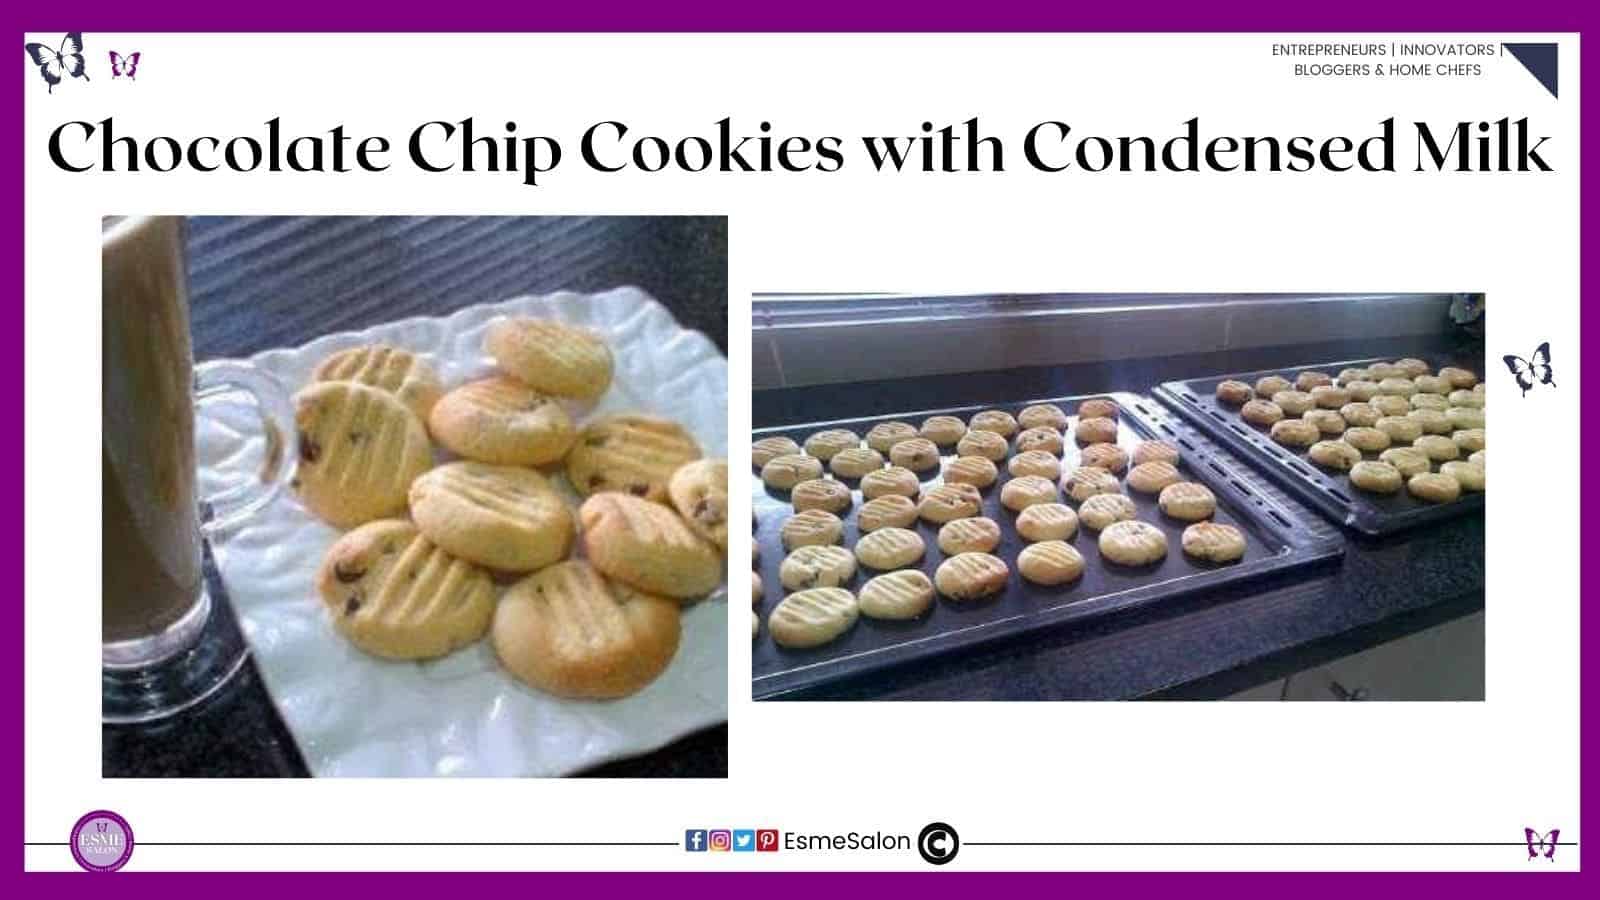 an image of a white square platter as well as two baking trays filled with Chocolate Chip Cookies with Condensed Milk